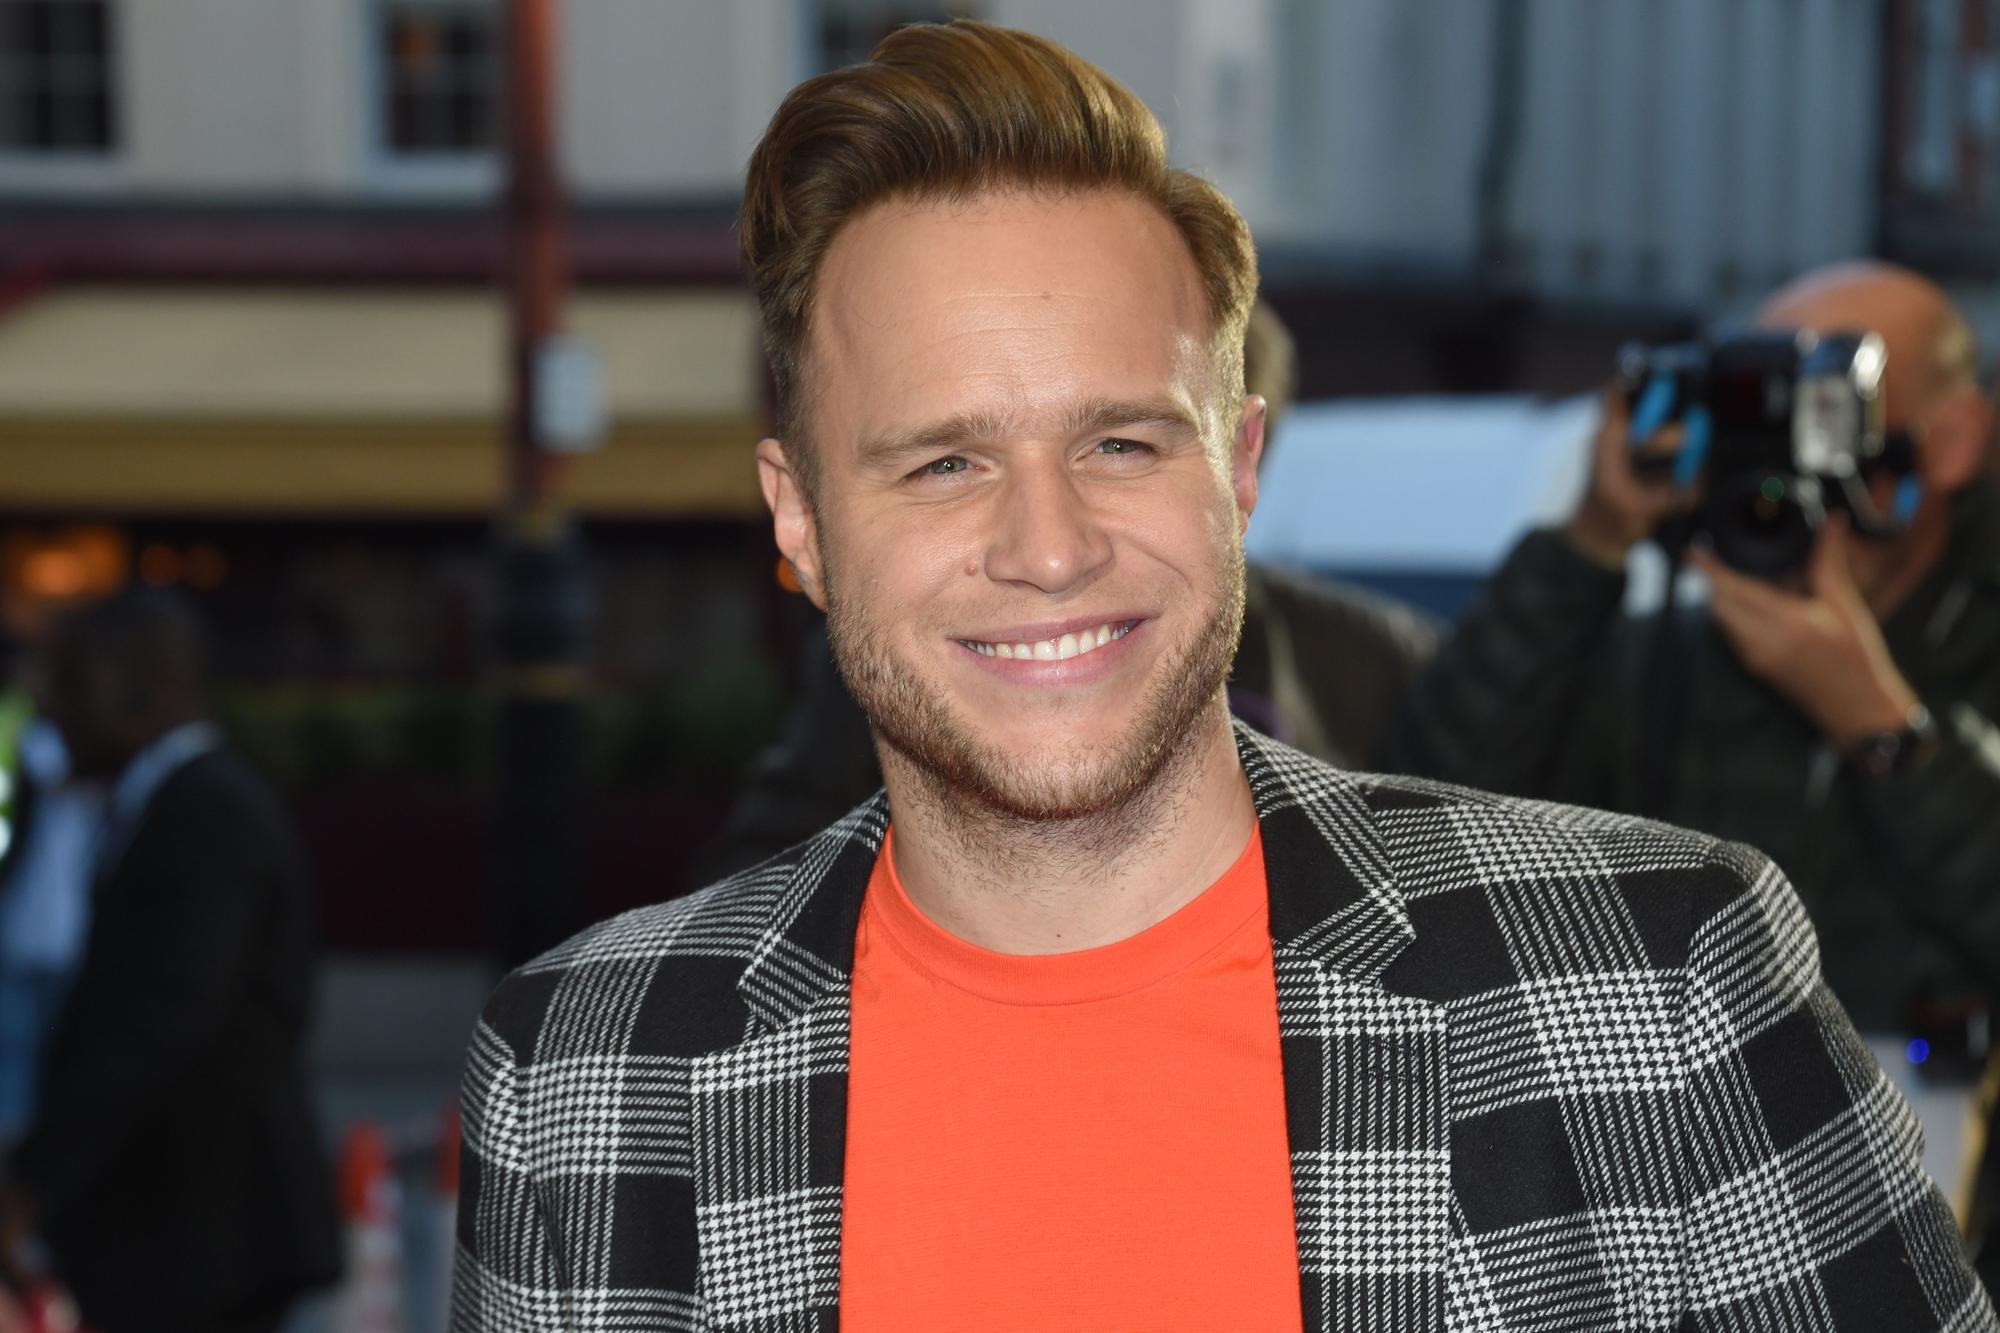 Olly Murs is coming to Hampshire in 2021 - here's how to get tickets ...